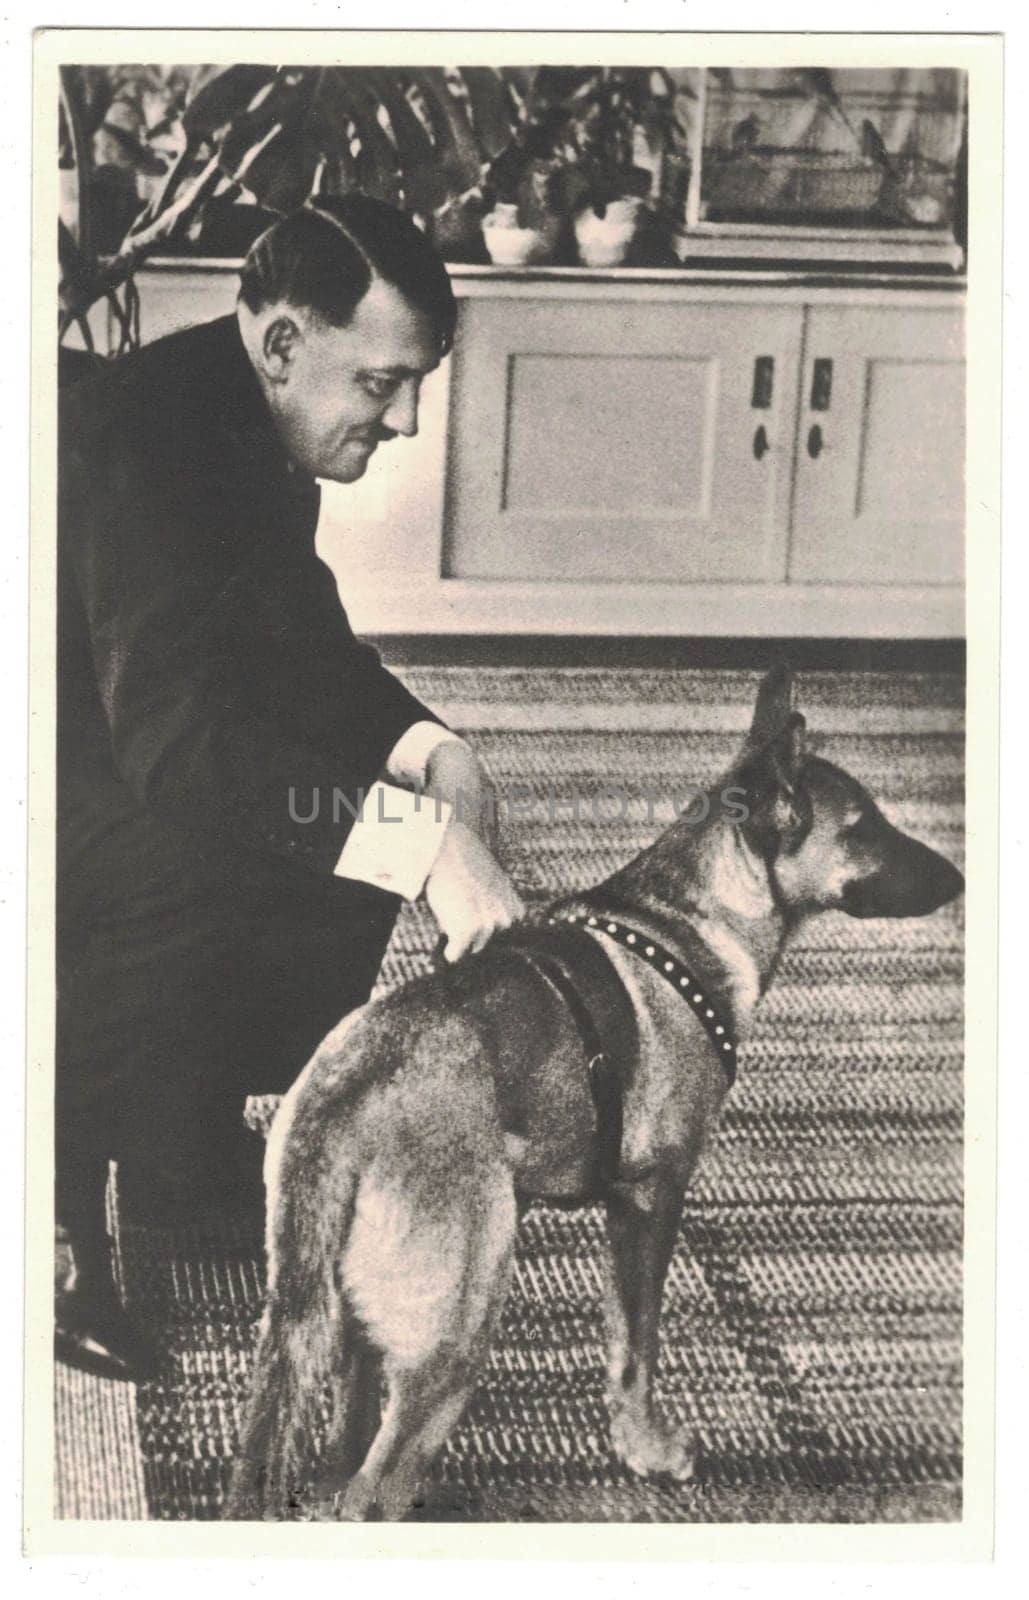 HAUS WACHENFELD, GERMANY - CIRCA 1940: Adolf Hitler and his dog. Hitler was leader of nazi Germany. Reproduction of antique photo.